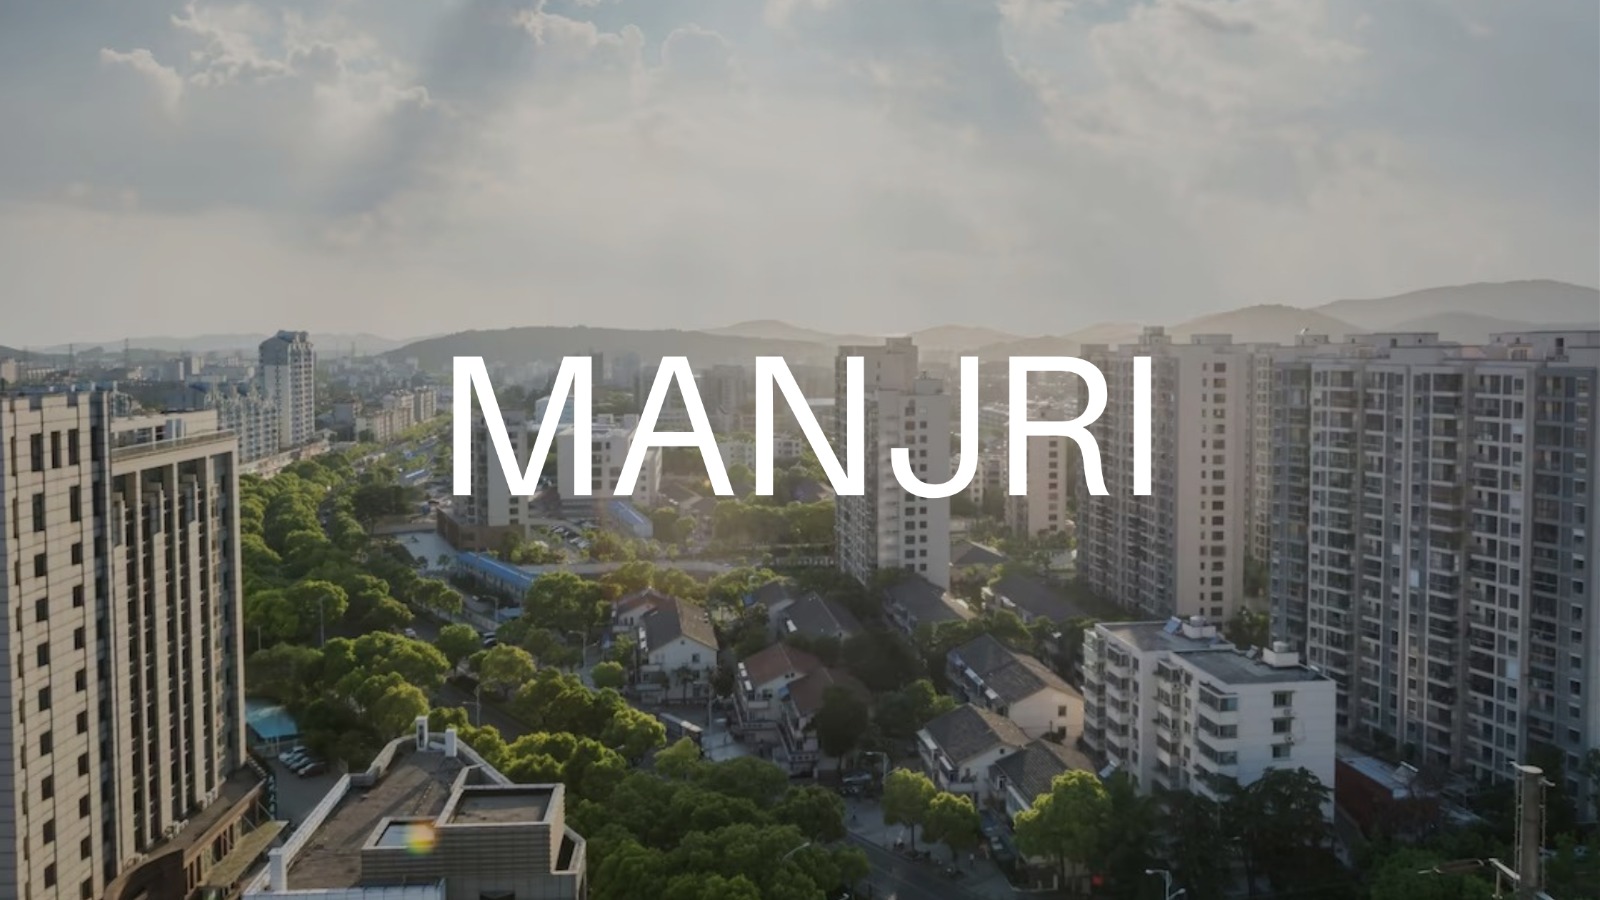 Why Should We Buy a Home in Manjri?